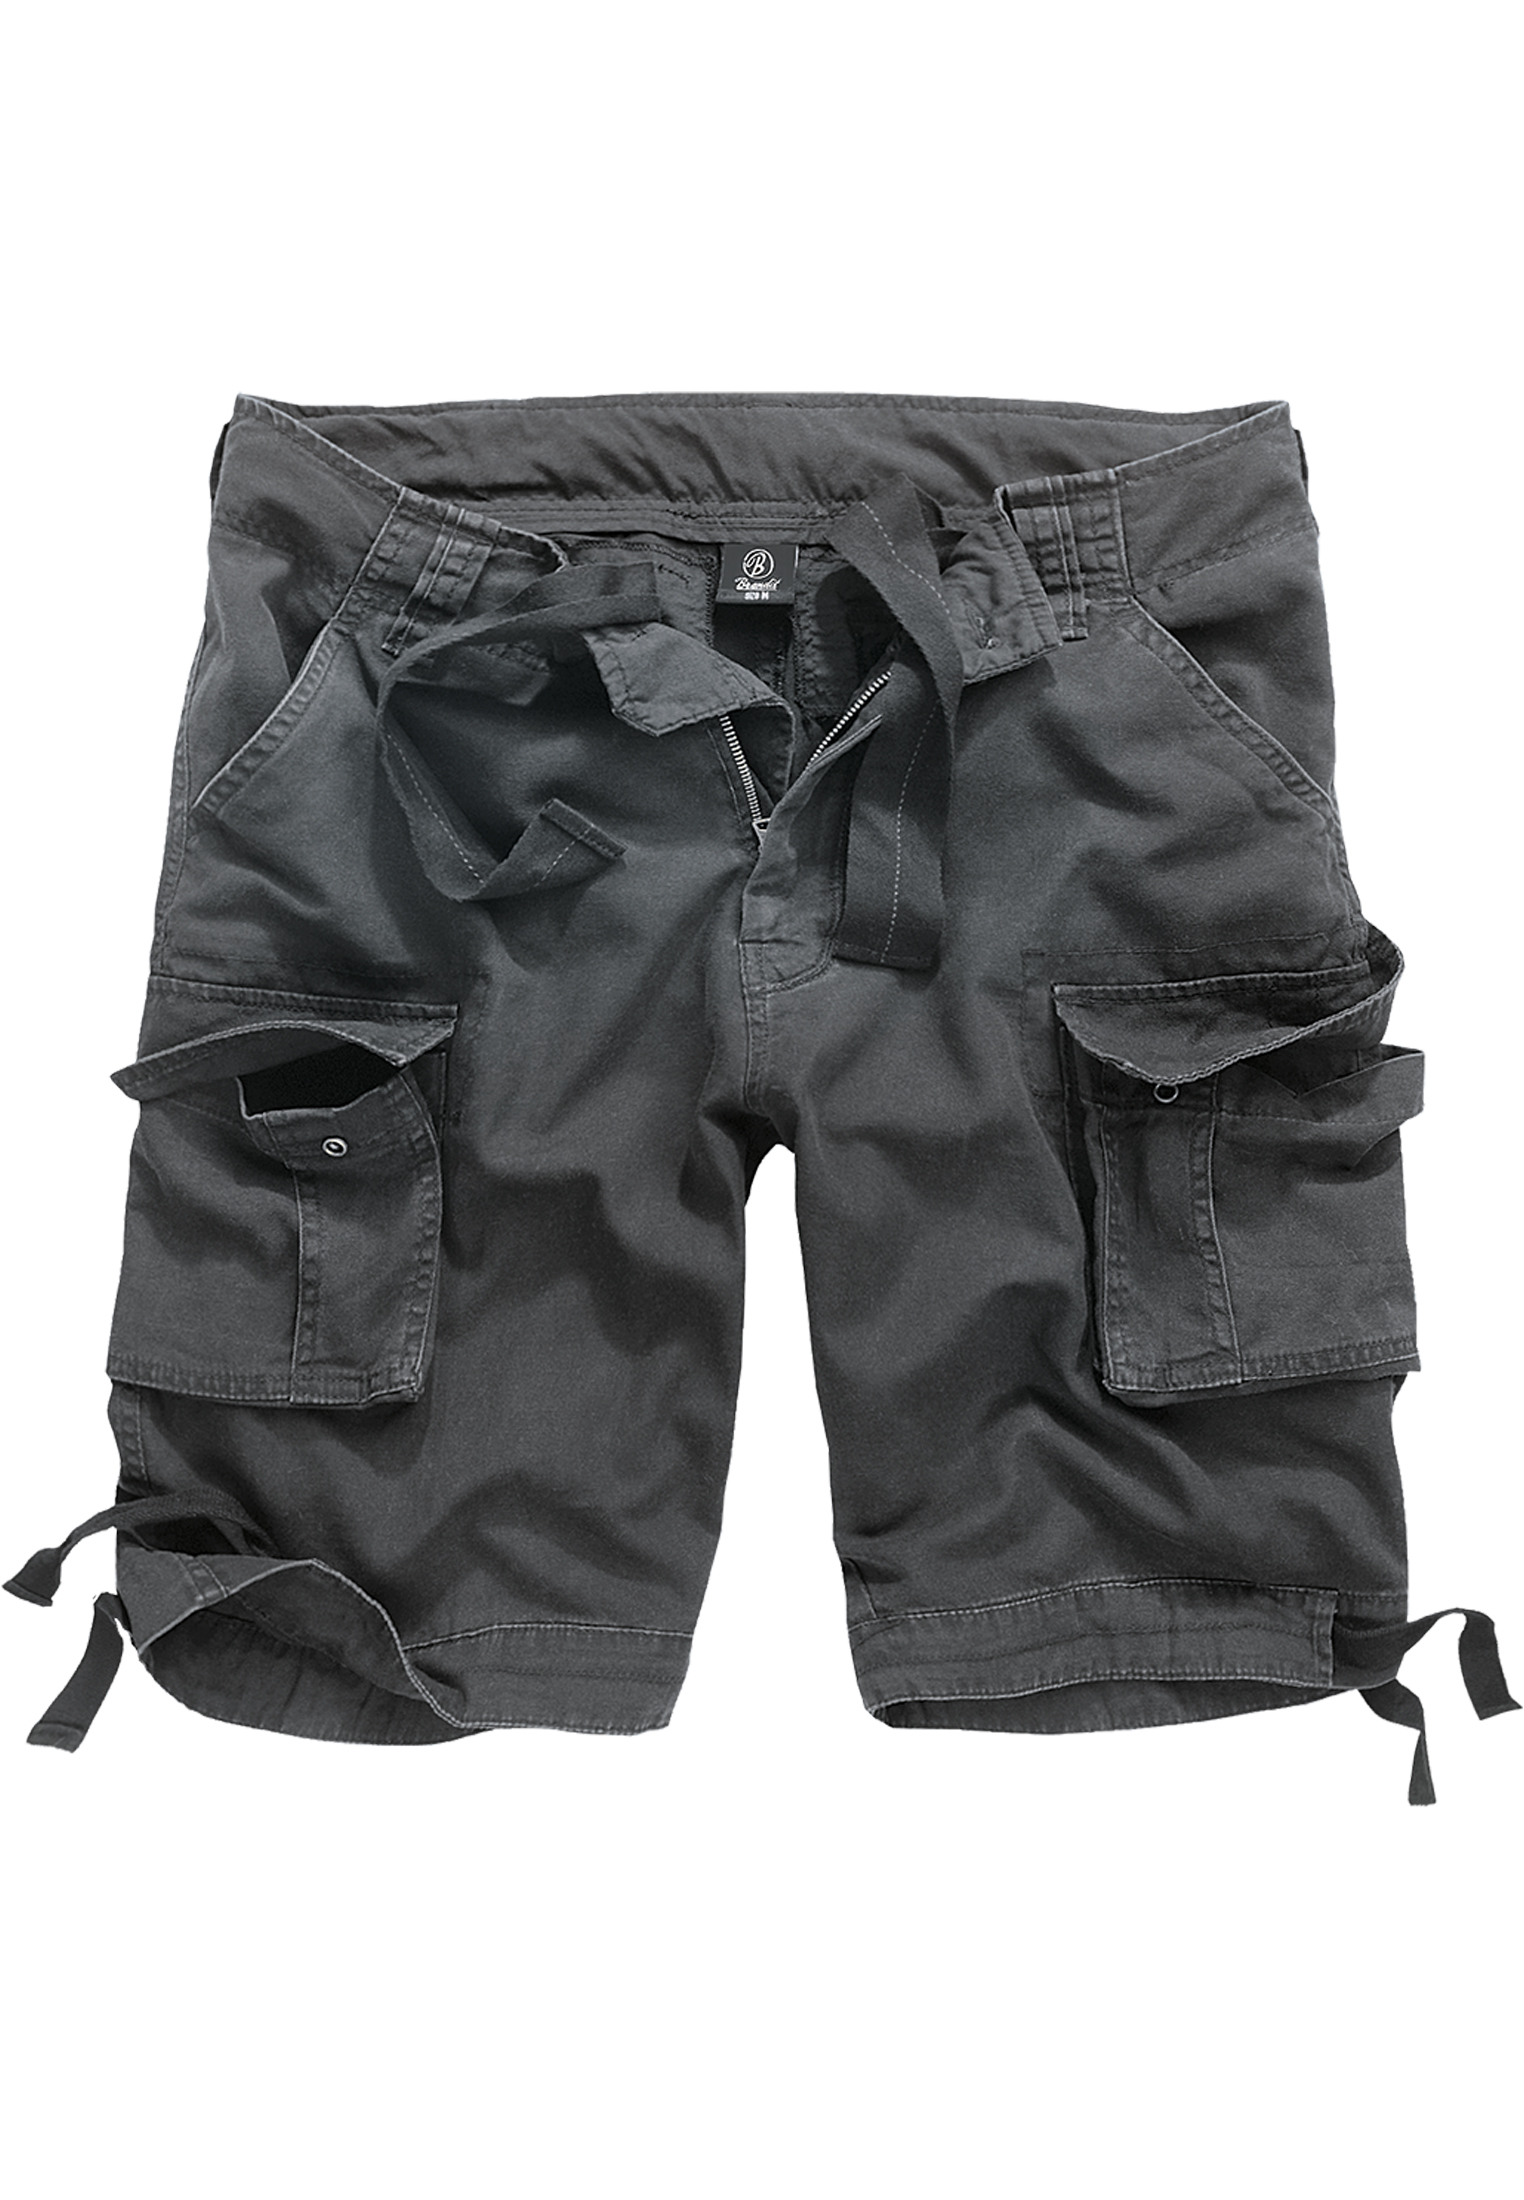 Urban Legend Cargo Shorts for Charcoal